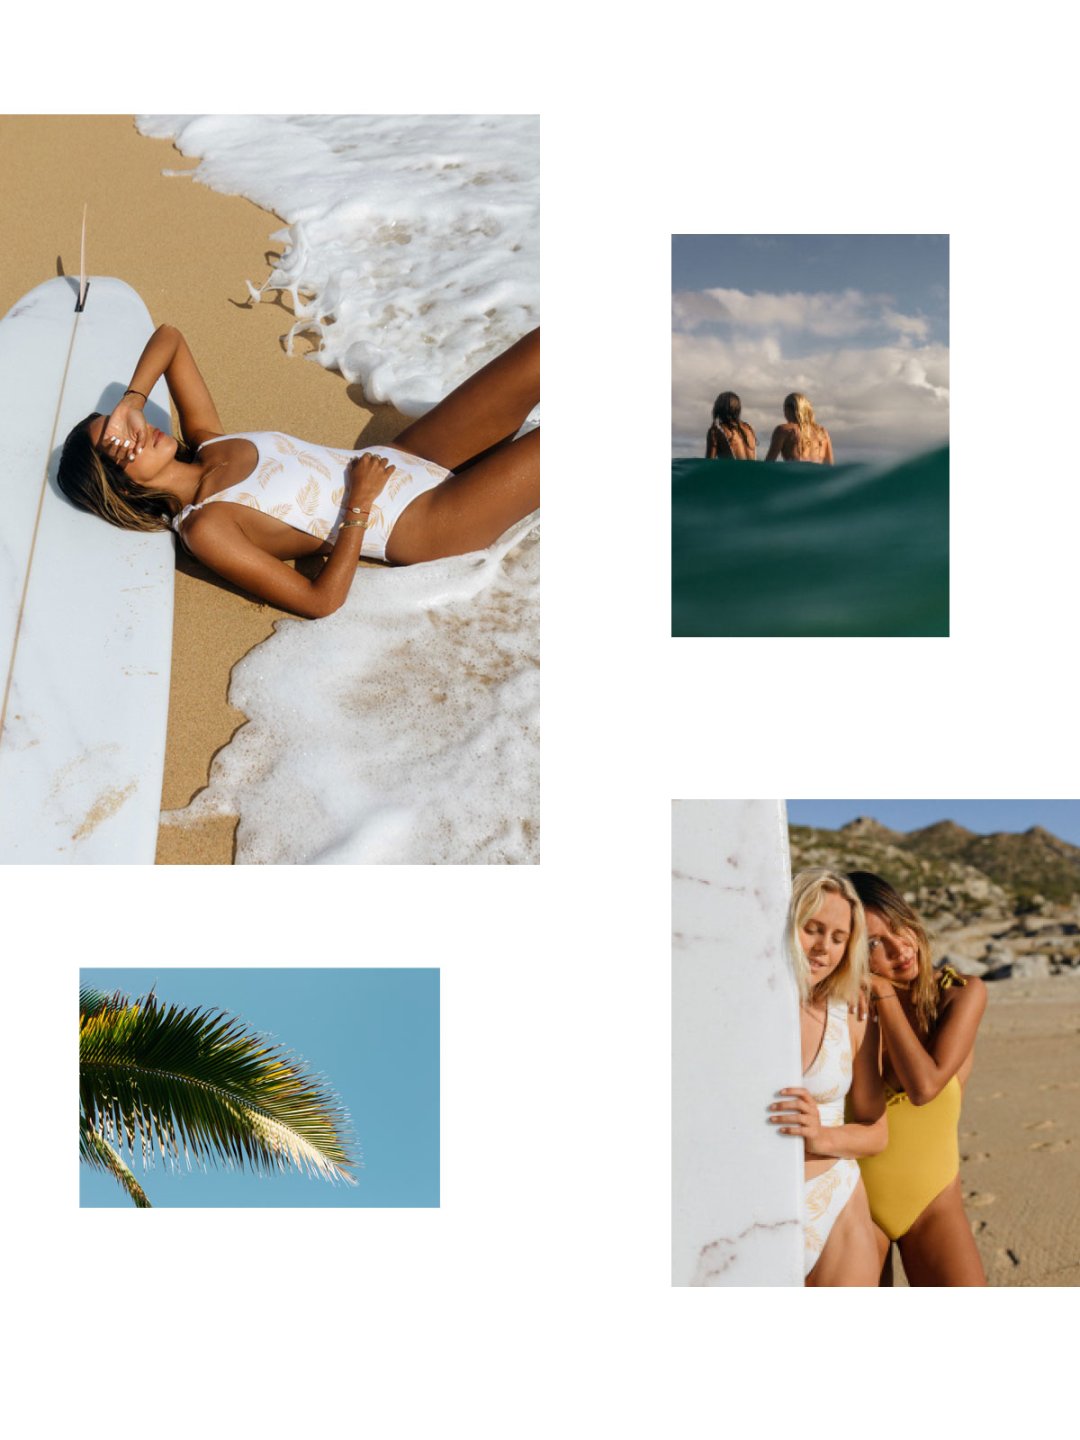 WATCH Billabong x Sincerely Jules Beyond the Shoreline + collection